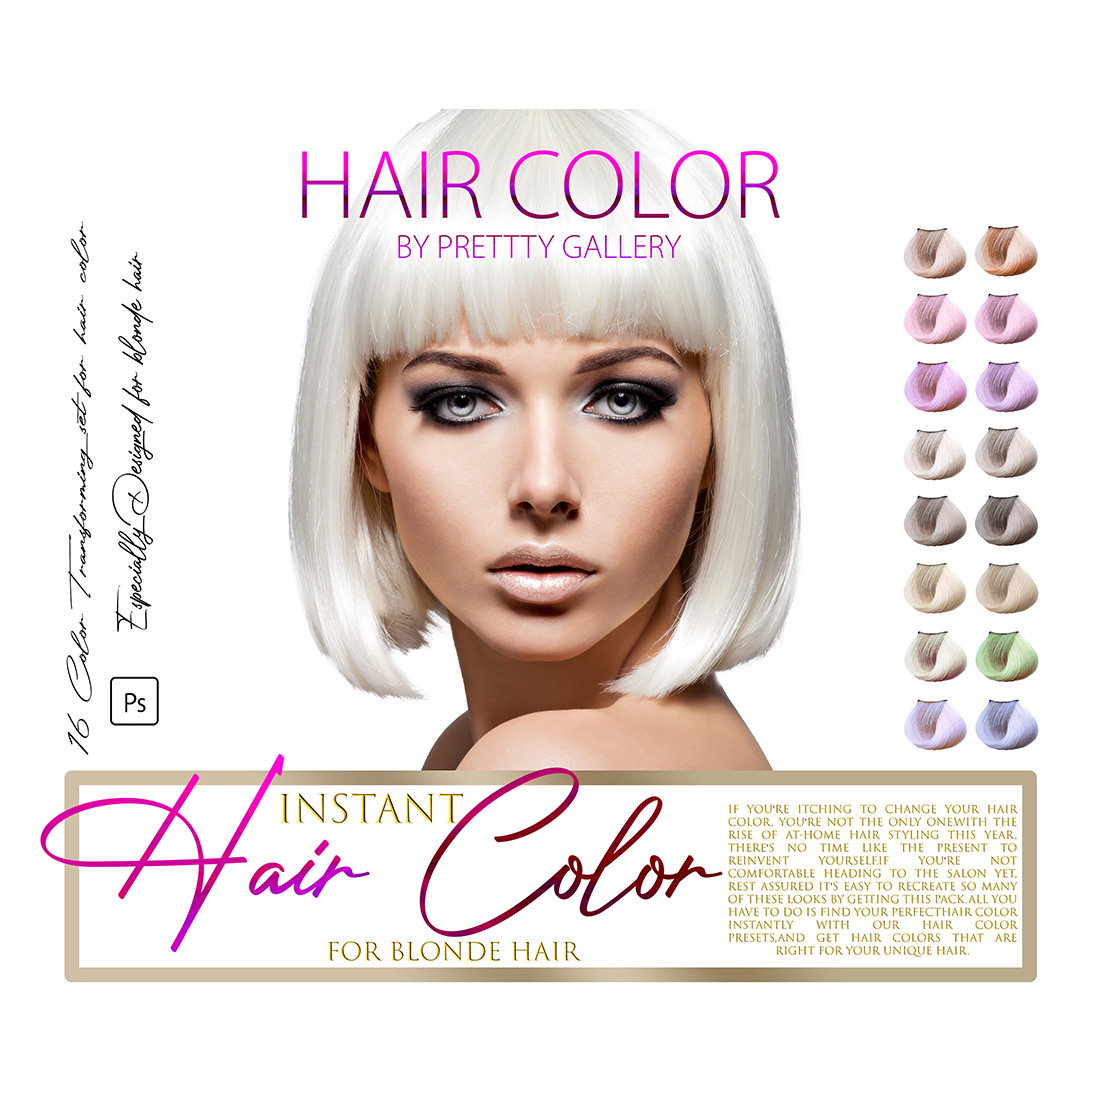 16 Hair Color Photoshop Actions, Beauty Blonde ACR Preset, Hairstyle girl Filter, Portrait And Lifestyle Theme For Instagram, Blogger, Outdoor cover image.